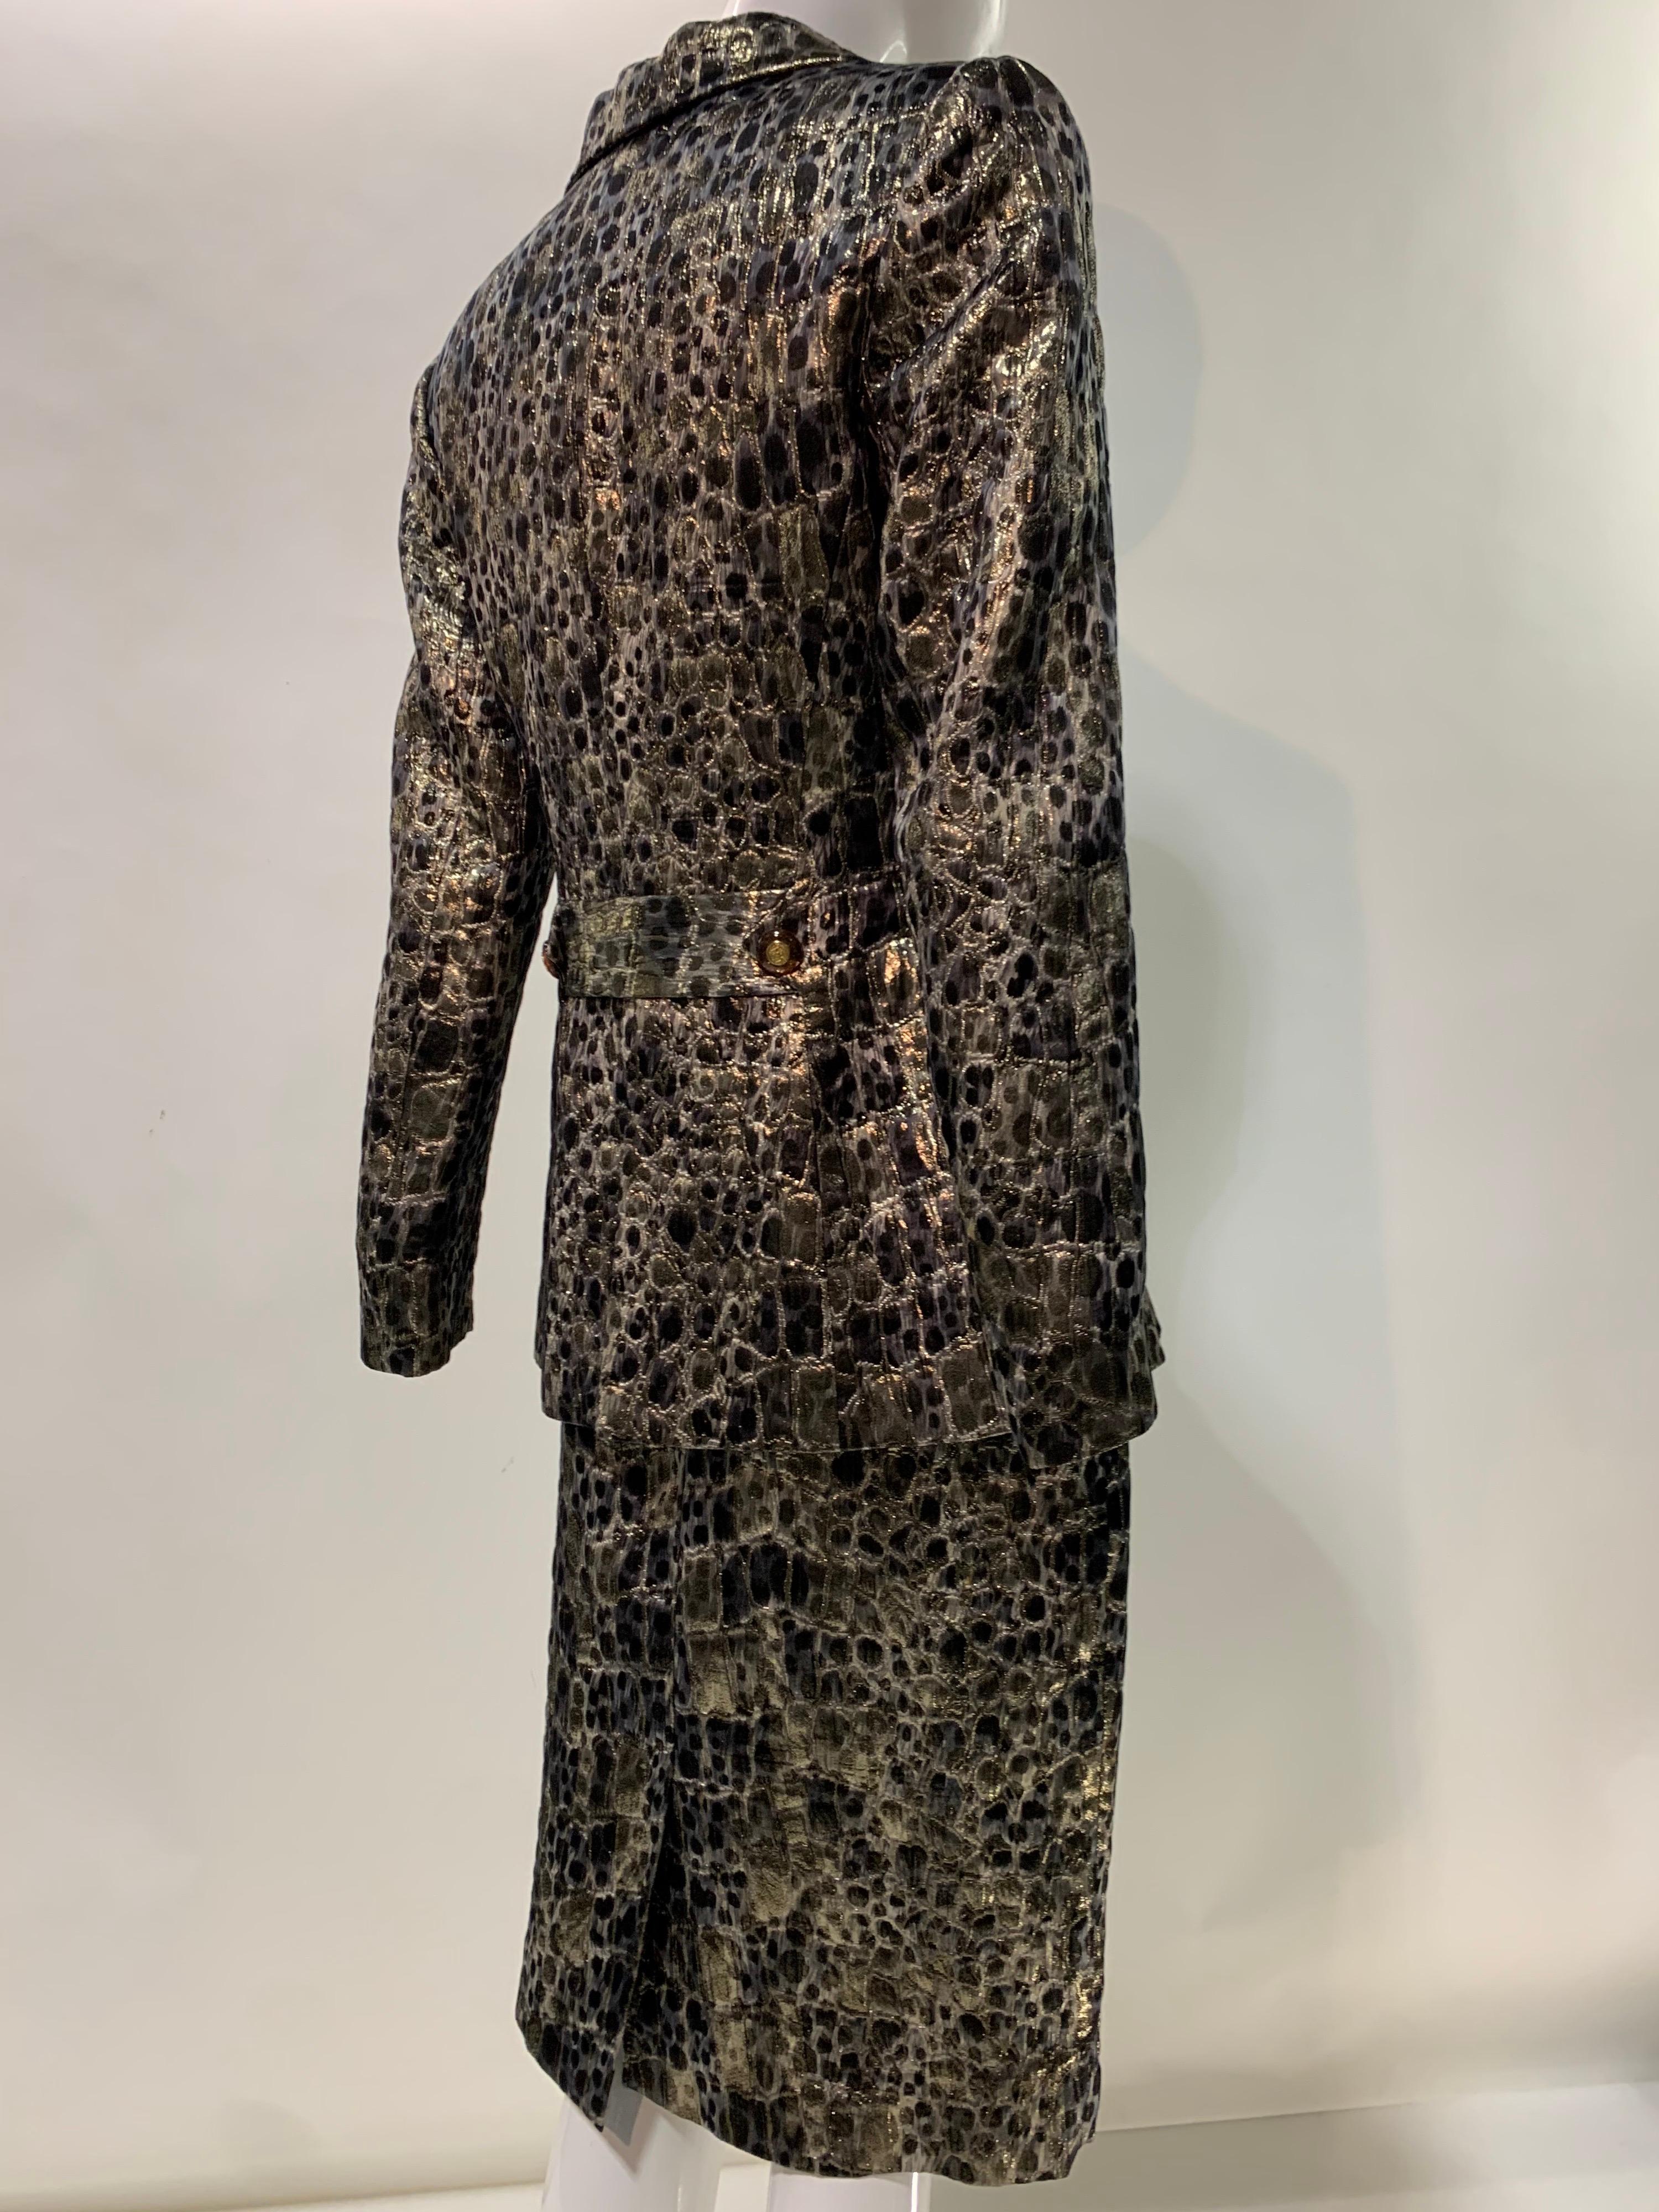 1980 Wild Theirry Mugler Metallic Silk Brocade Print Military Style Skirt Suit In Excellent Condition For Sale In Gresham, OR